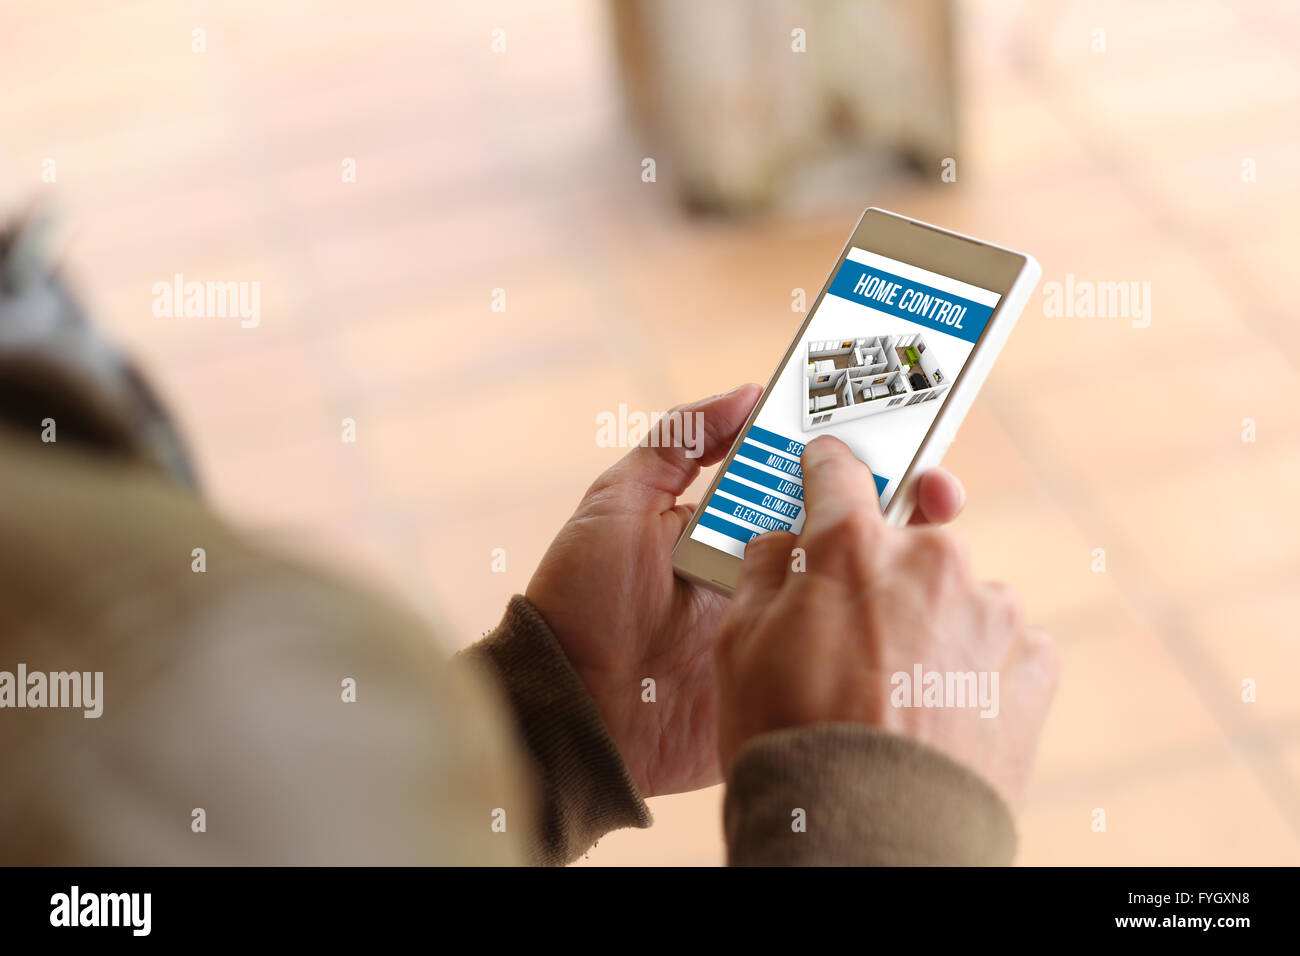 man touching the screen of his smartphone showing home automation app. All screen graphics are made up. Stock Photo